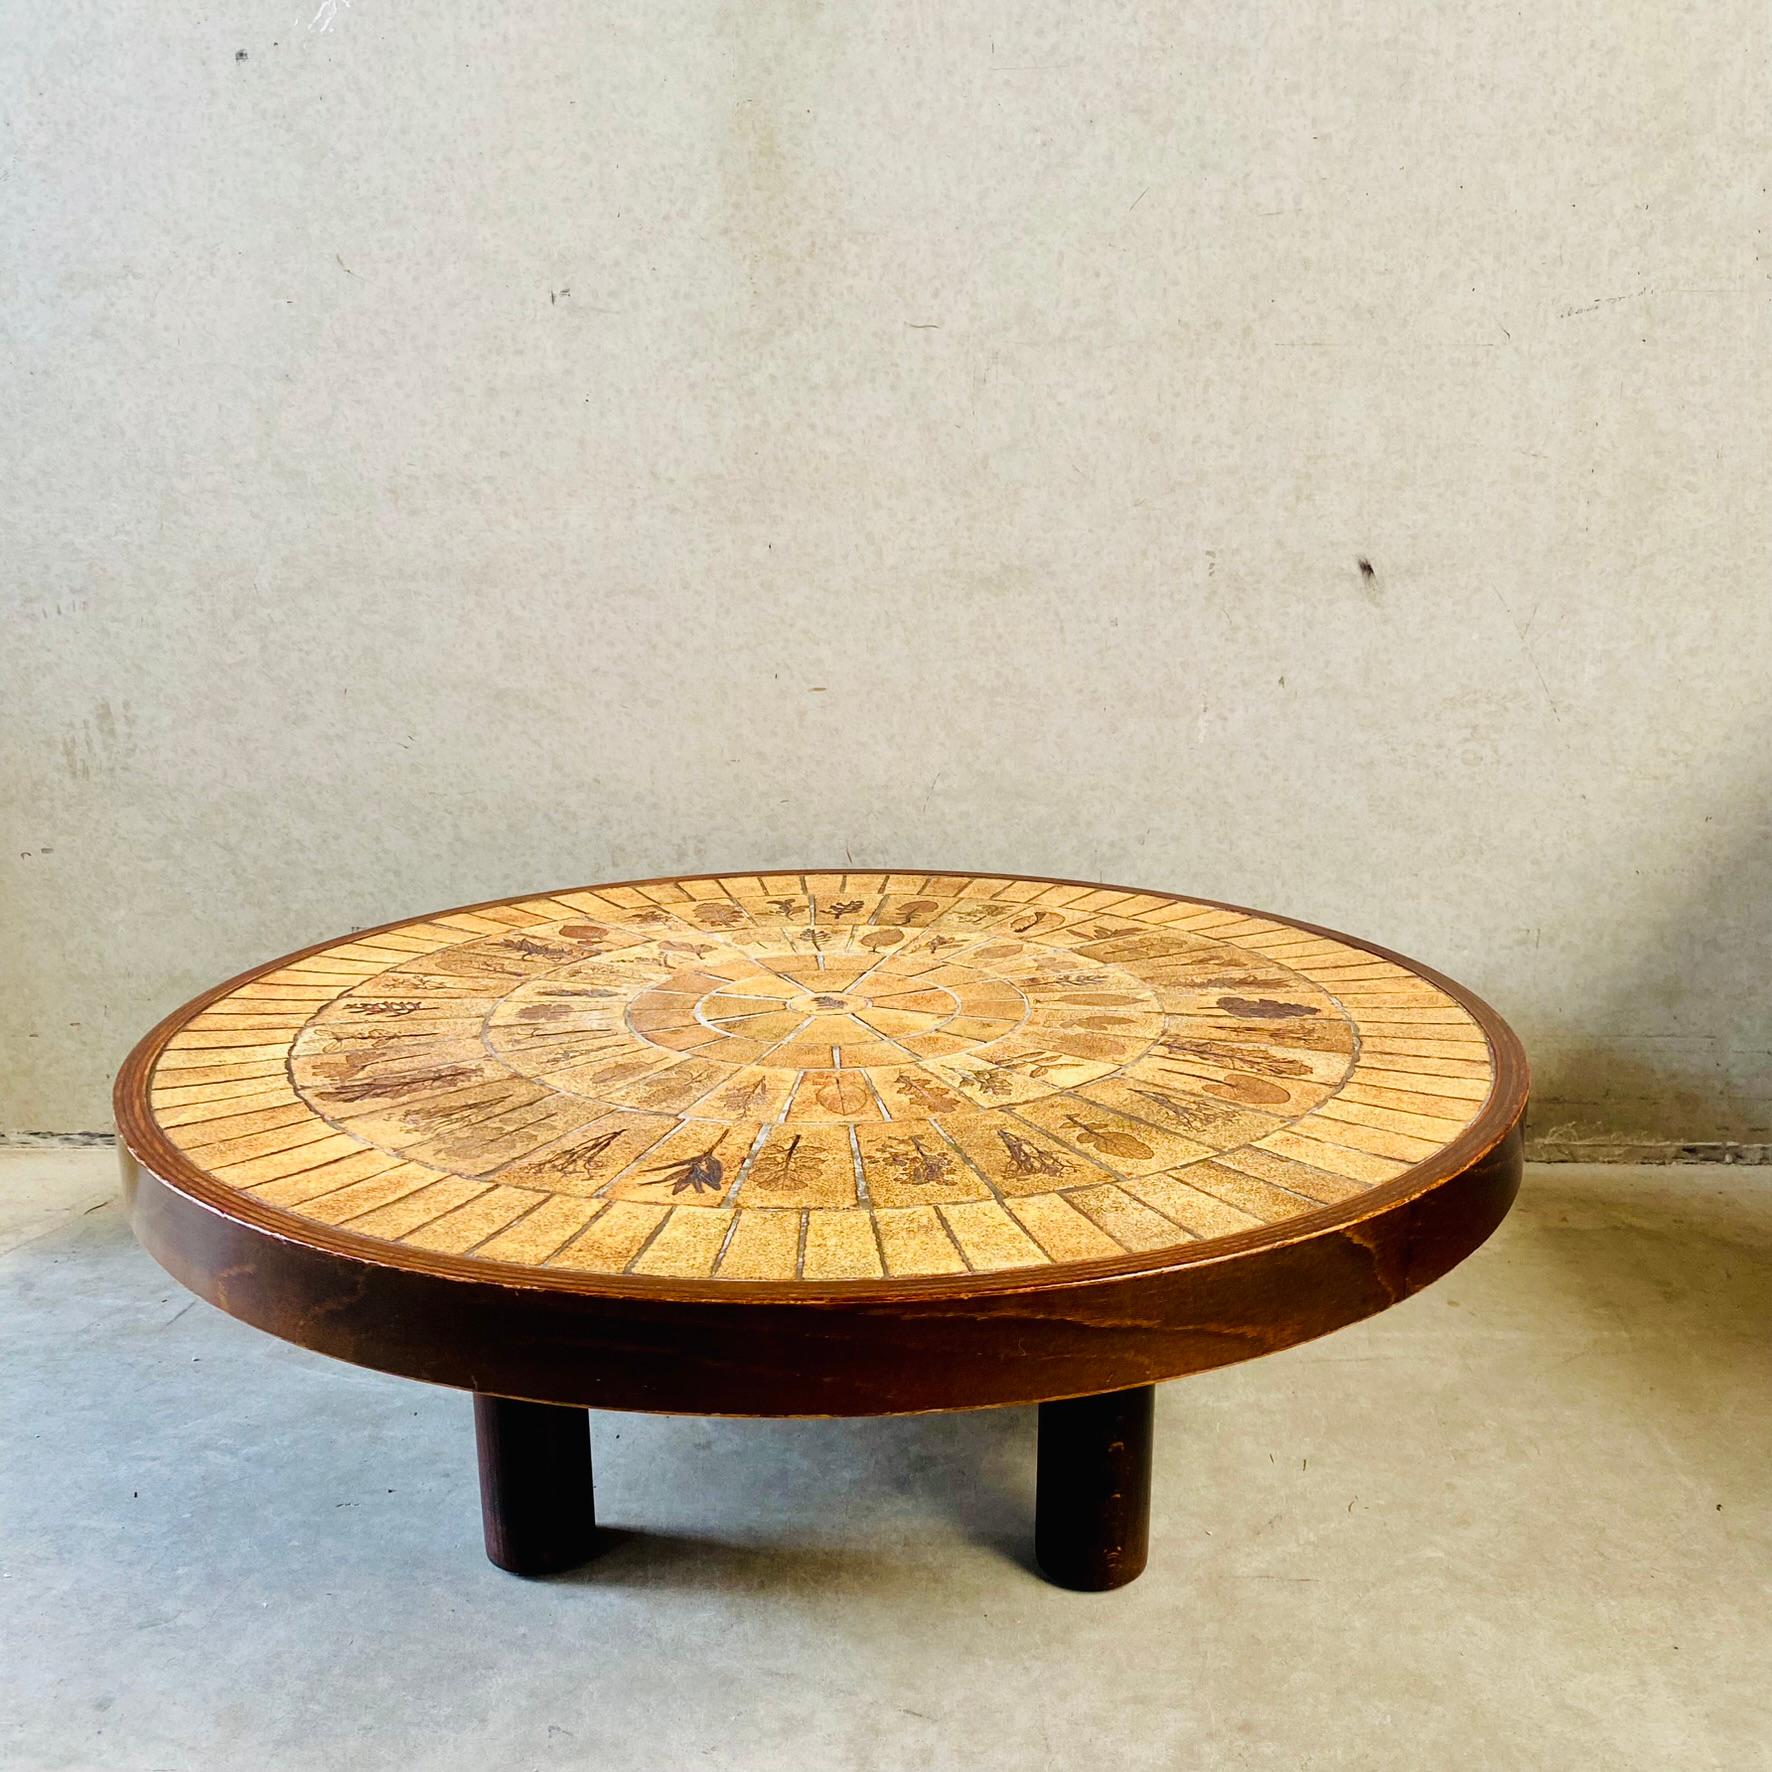 Round Brutalist Ceramic Coffee Table by Roger Capron, France 1960 For Sale 10